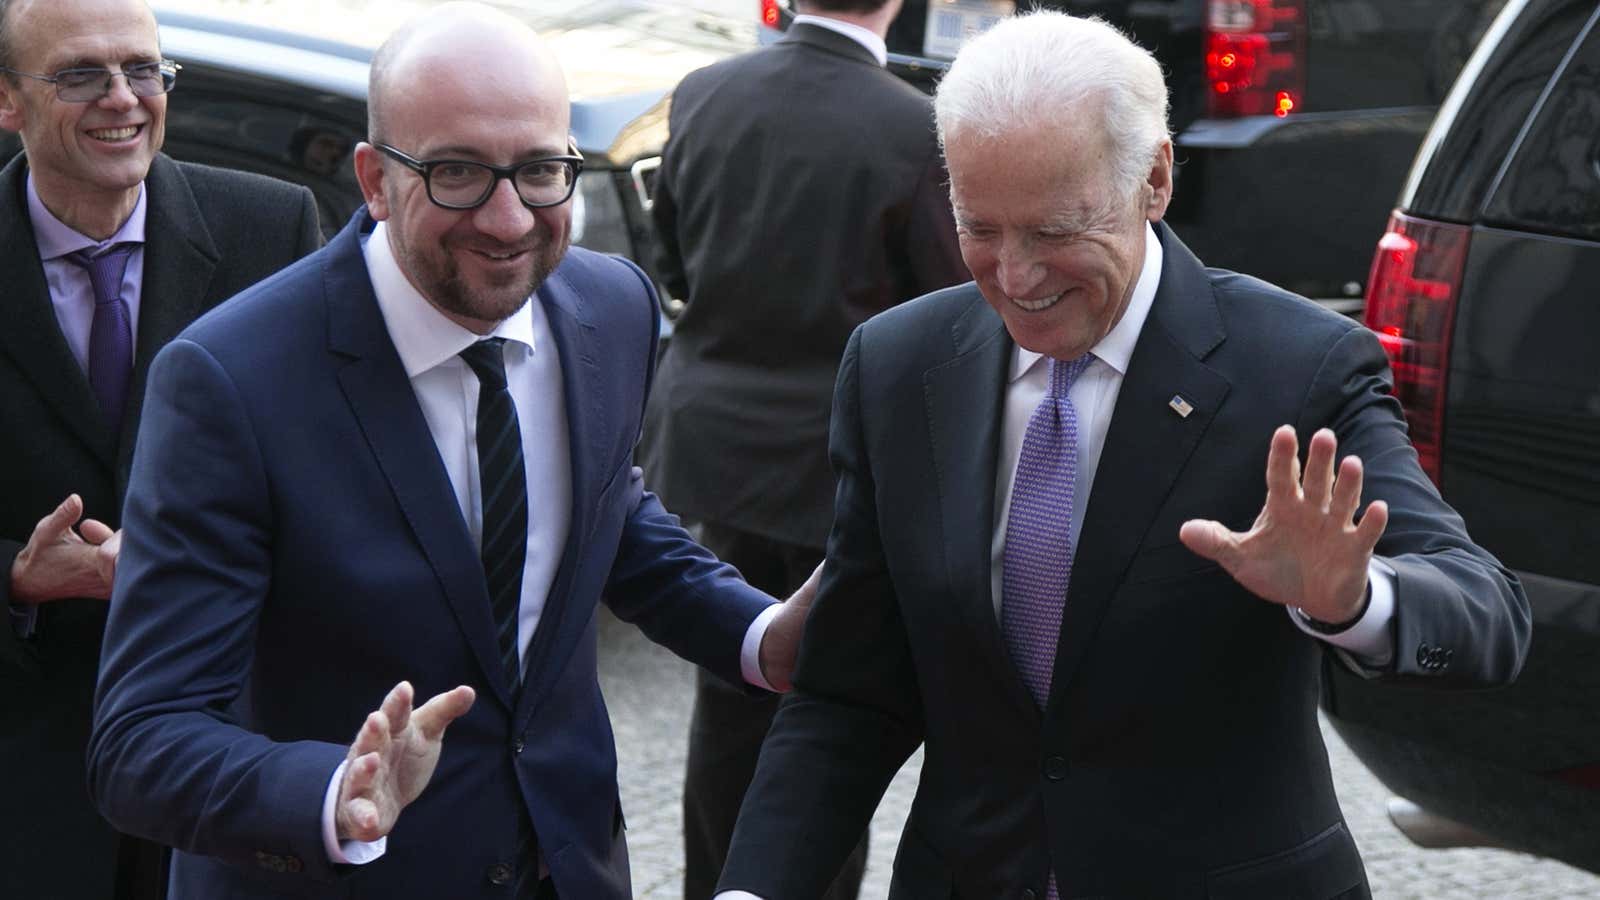 Biden with Charles Michel, then Belgium’s prime minister, now European Council president. Biden’s long career in politics gives him an advantage: he knows everyone and everyone knows him.